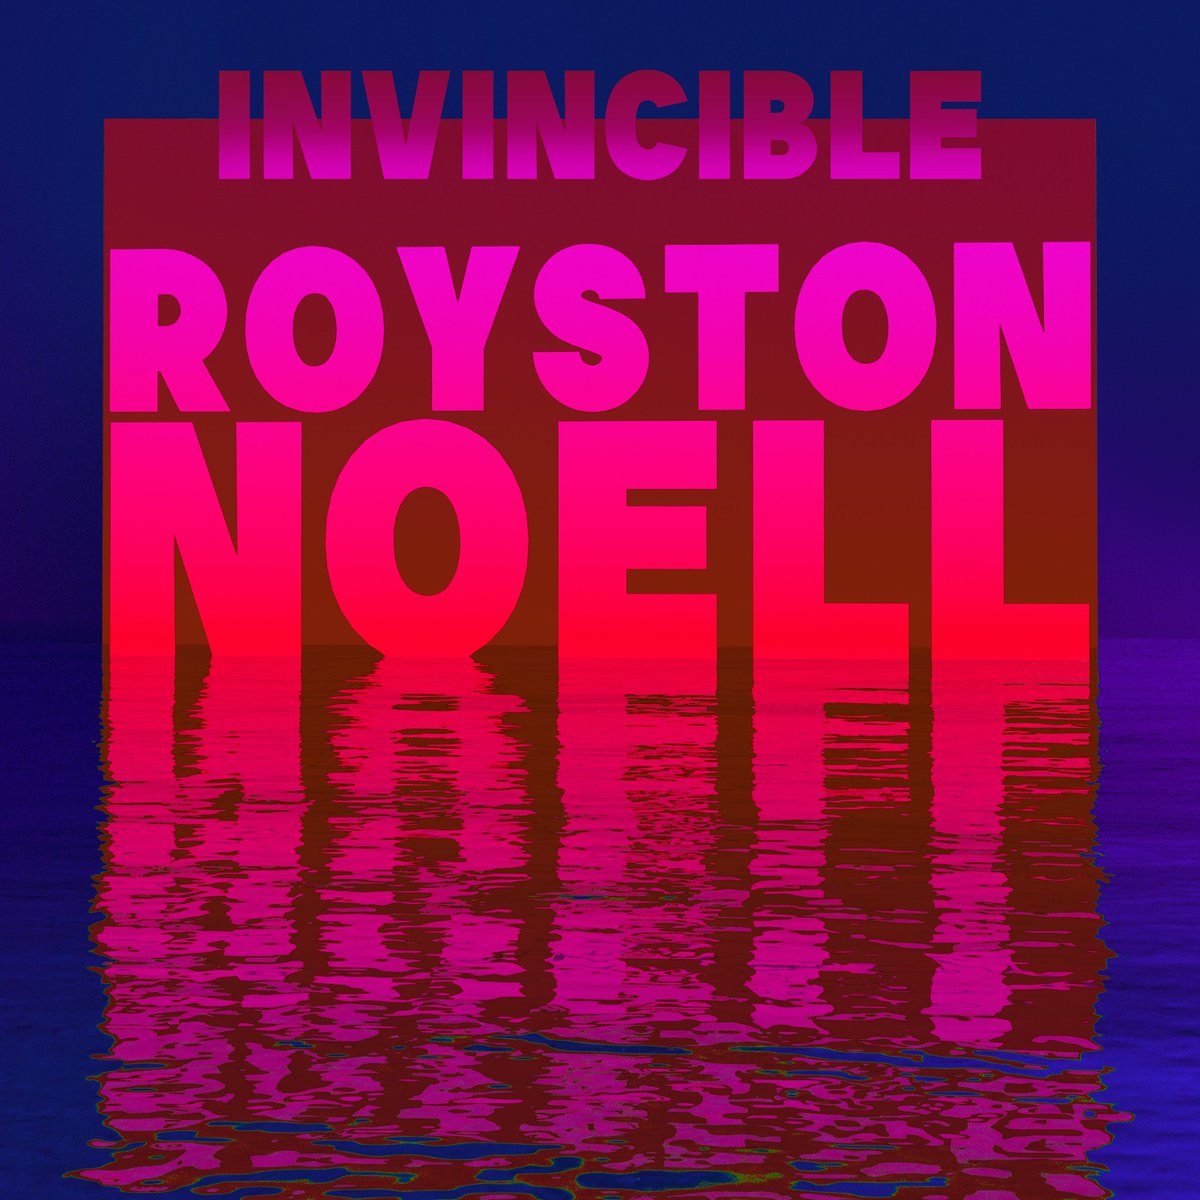 Stream, download or purchase Royston's winners single today! 🎵 

Invincible’ by Royston Noell out now: roystonnoell.lnk.to/invincible